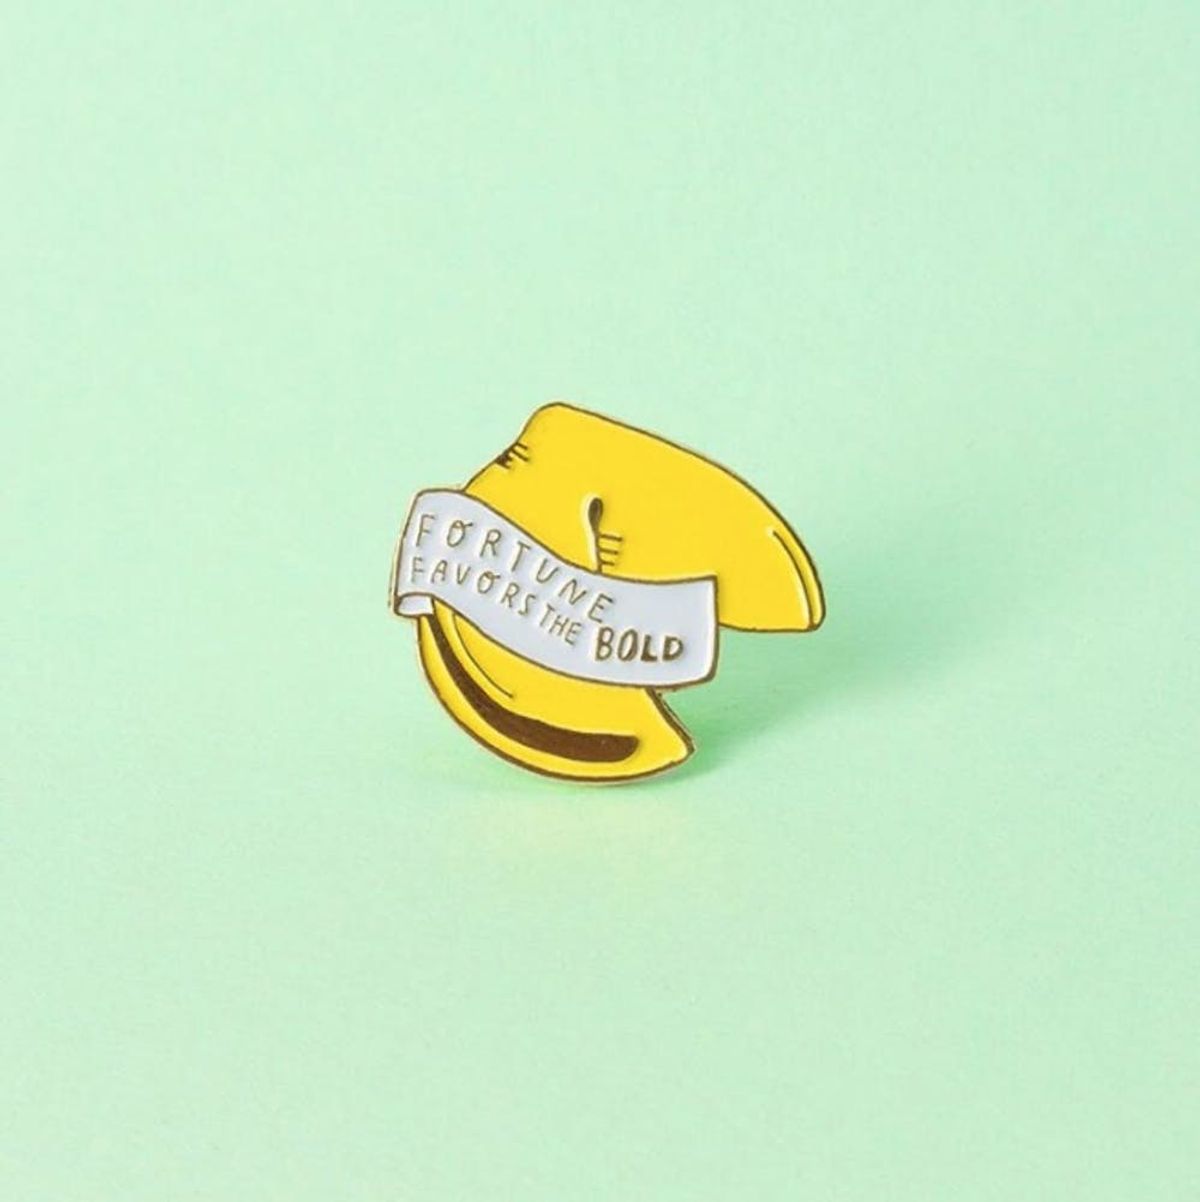 These New Celeb-Designed Inspirational Pins Just Became Your Newest Closet Staple